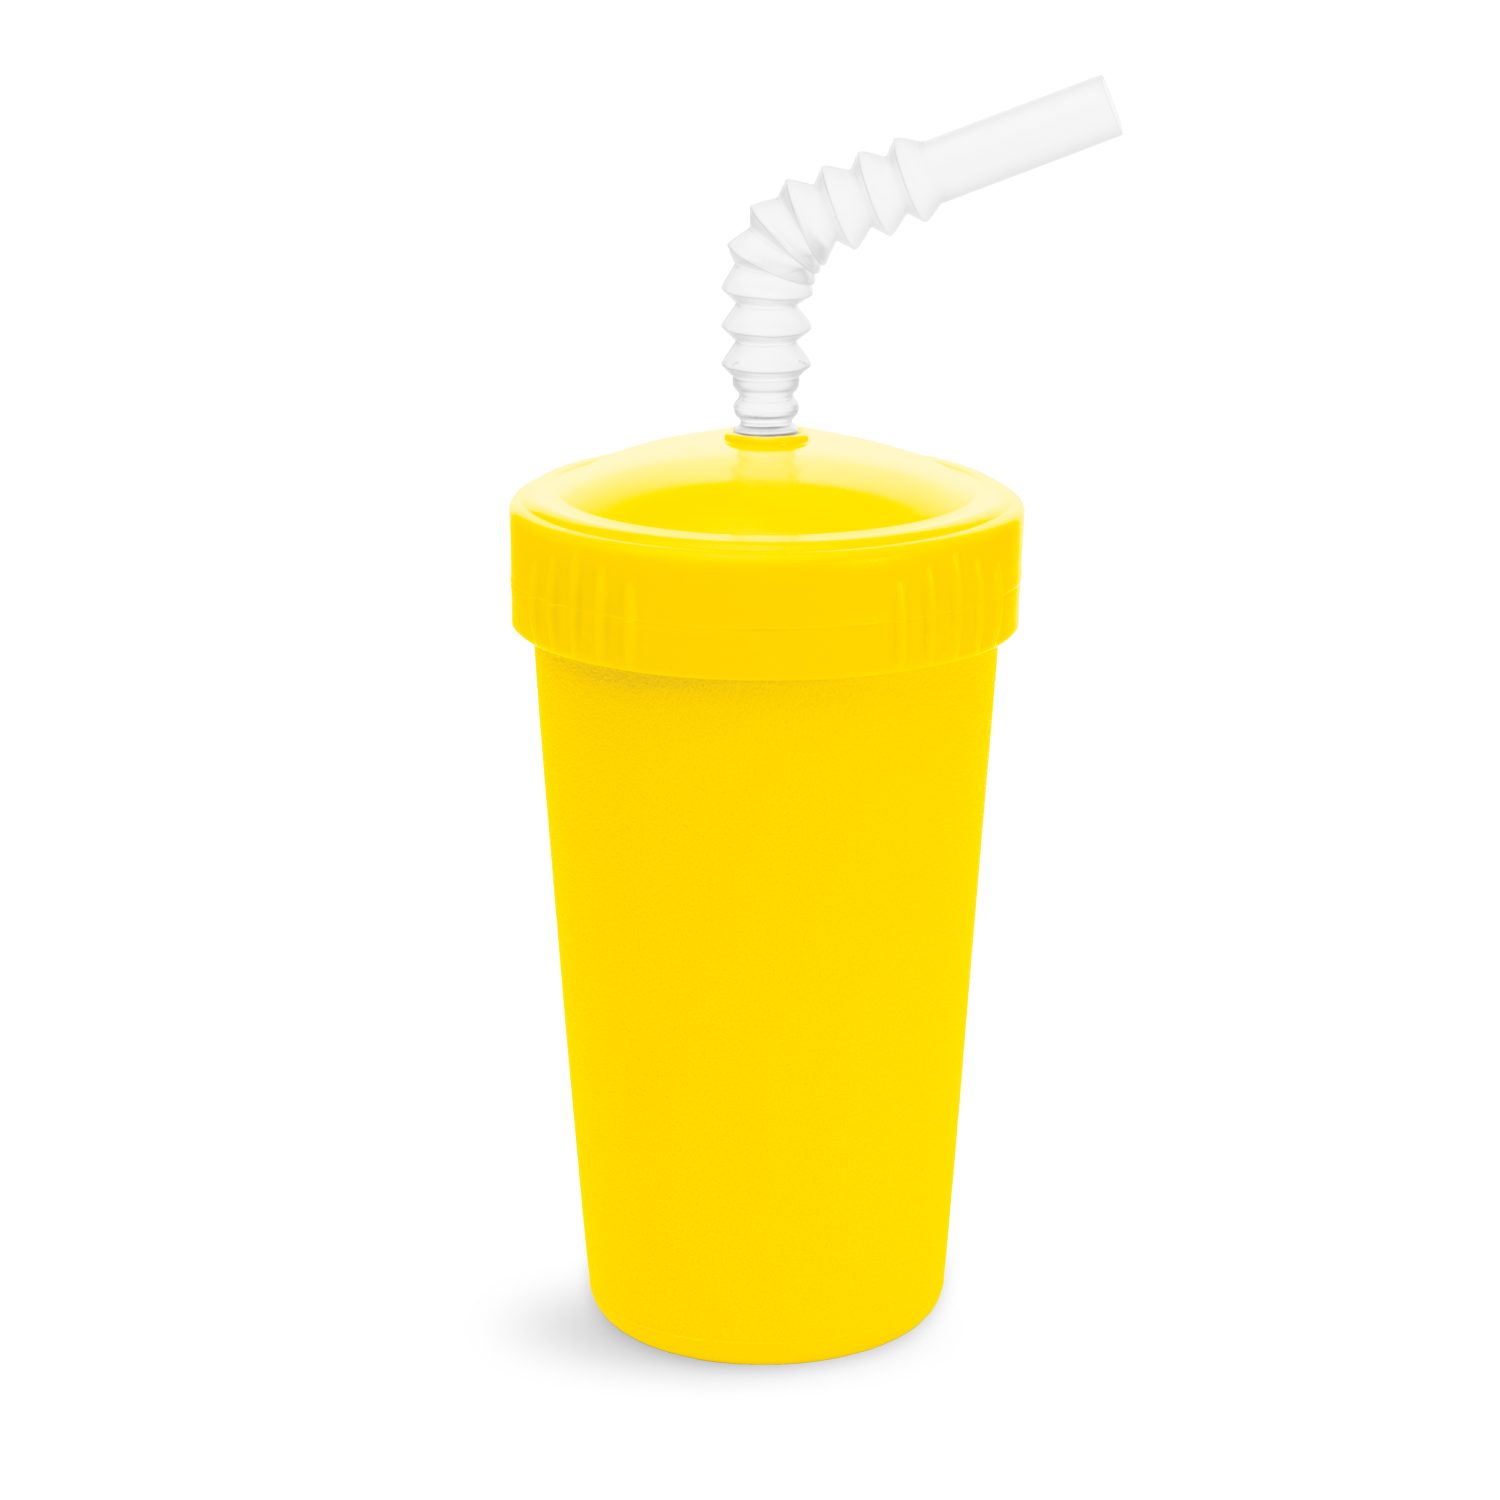 Re Play Made in USA 10 Oz. Straw Cups for Toddlers, Pack of 4 - Reusable  Kids Cups with Straws and L…See more Re Play Made in USA 10 Oz. Straw Cups